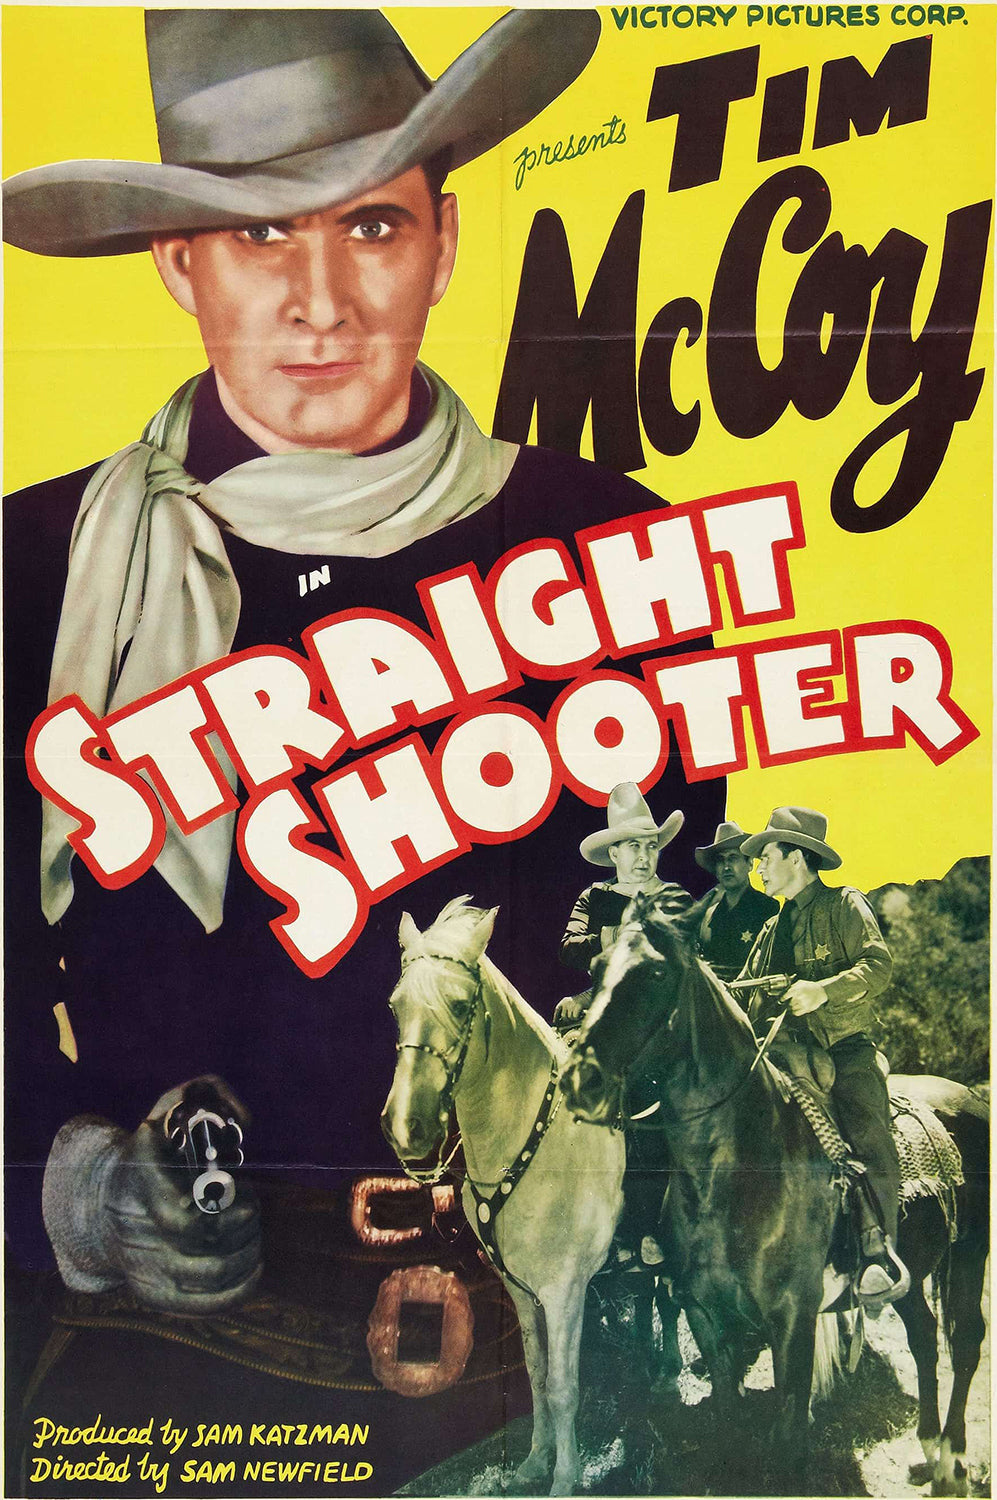 Straight Shooter (1939) Vintage Western Movie Poster